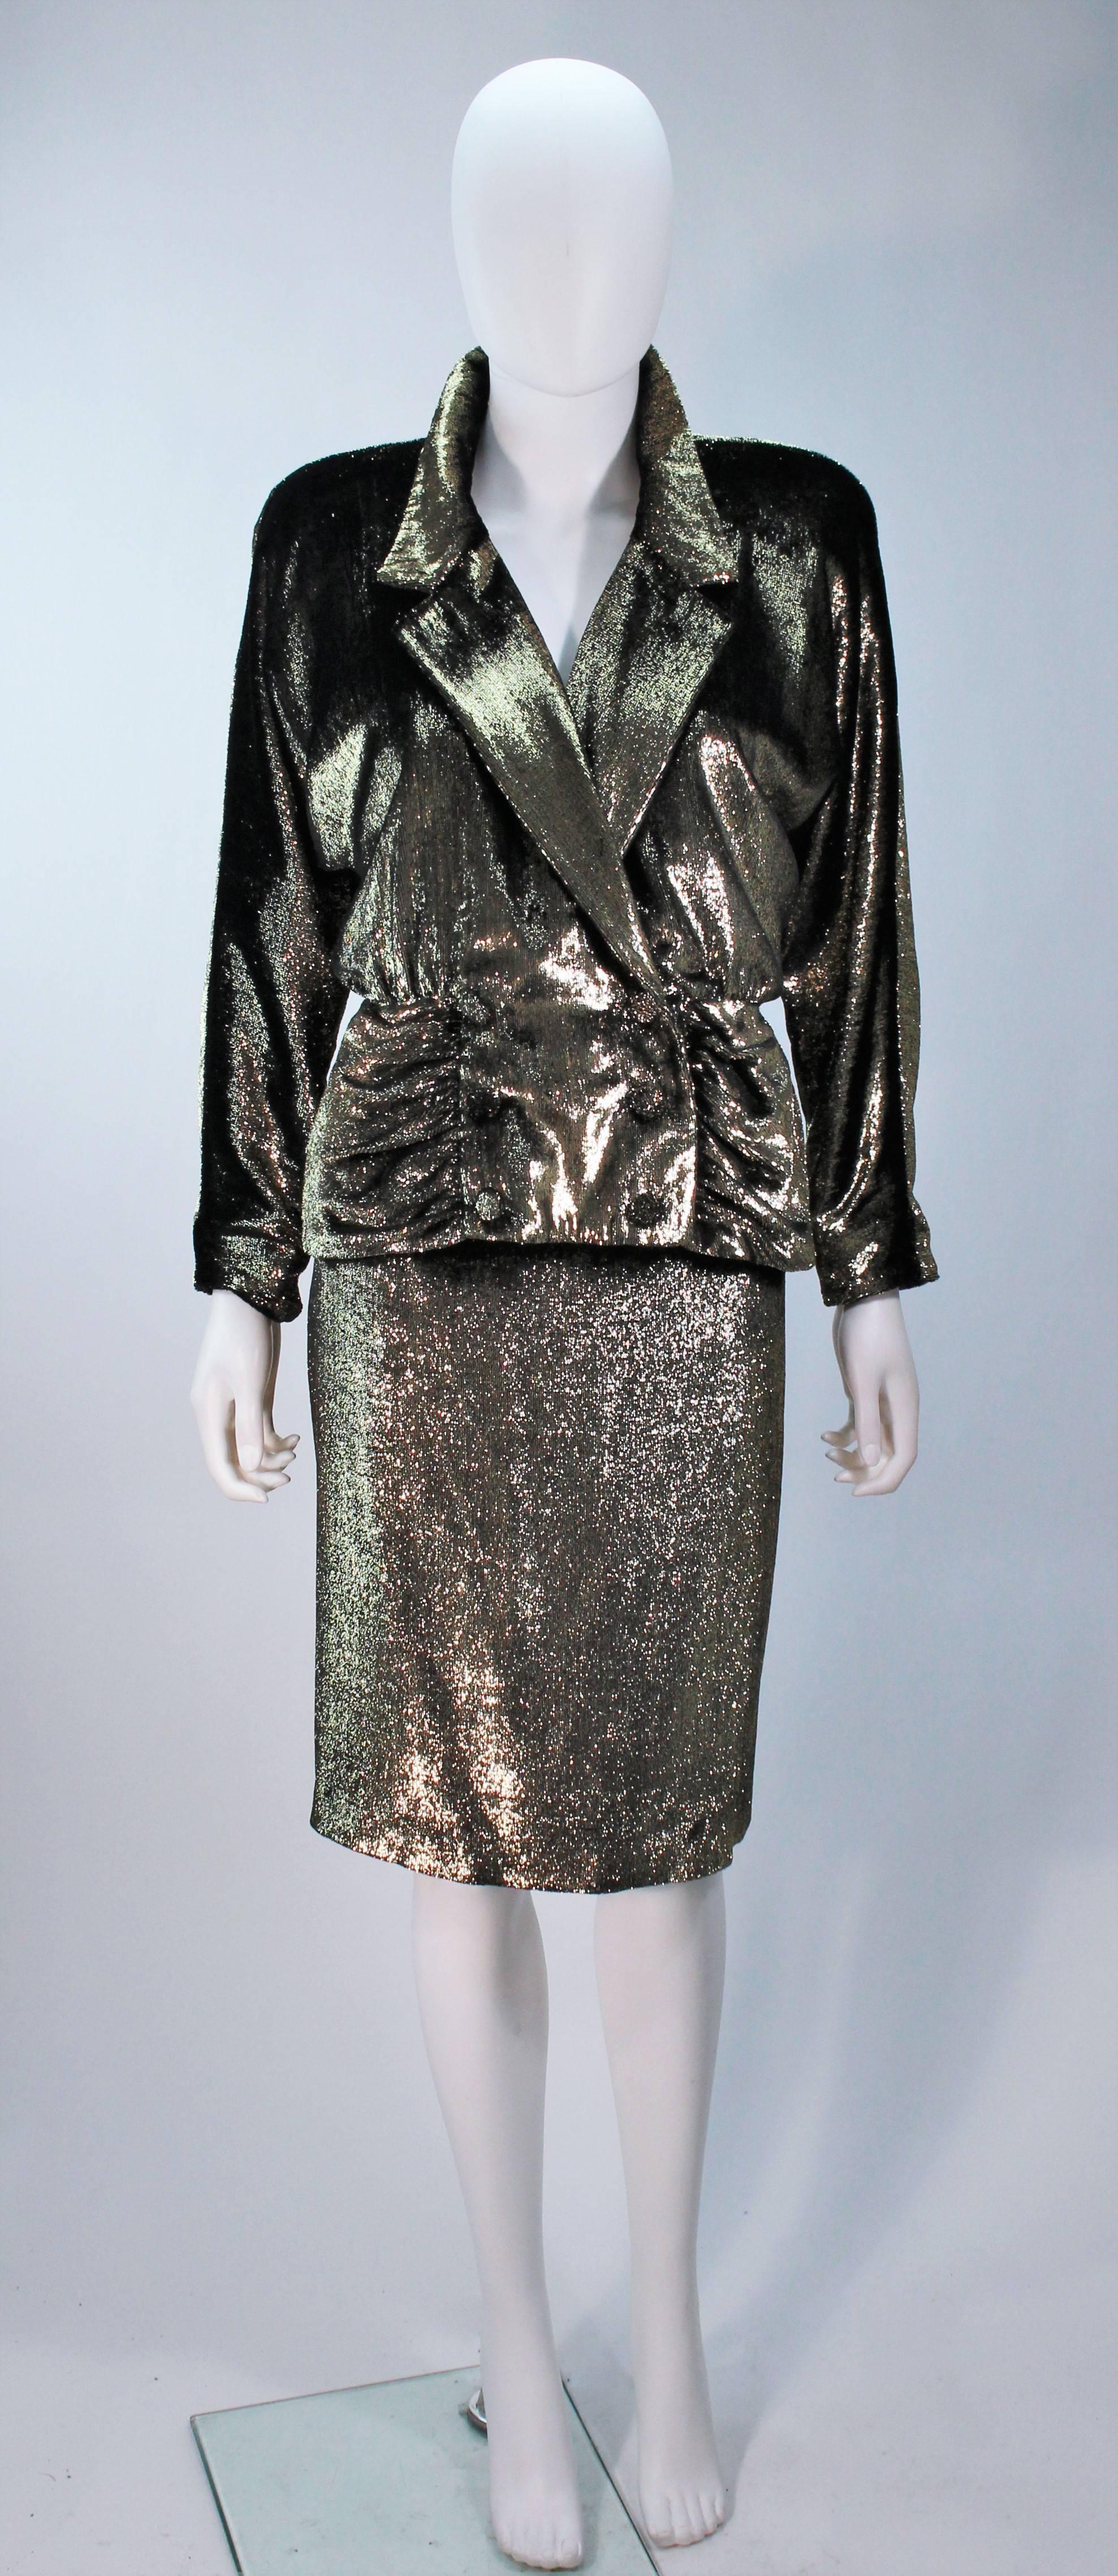  This Travilla  skirt suit is composed of a black and gold metallic velvet lame. The suit jacket features center front closures, shoulder pads, and a draped neckline. The skirt has a zipper closure. In excellent vintage condition.

  **Please